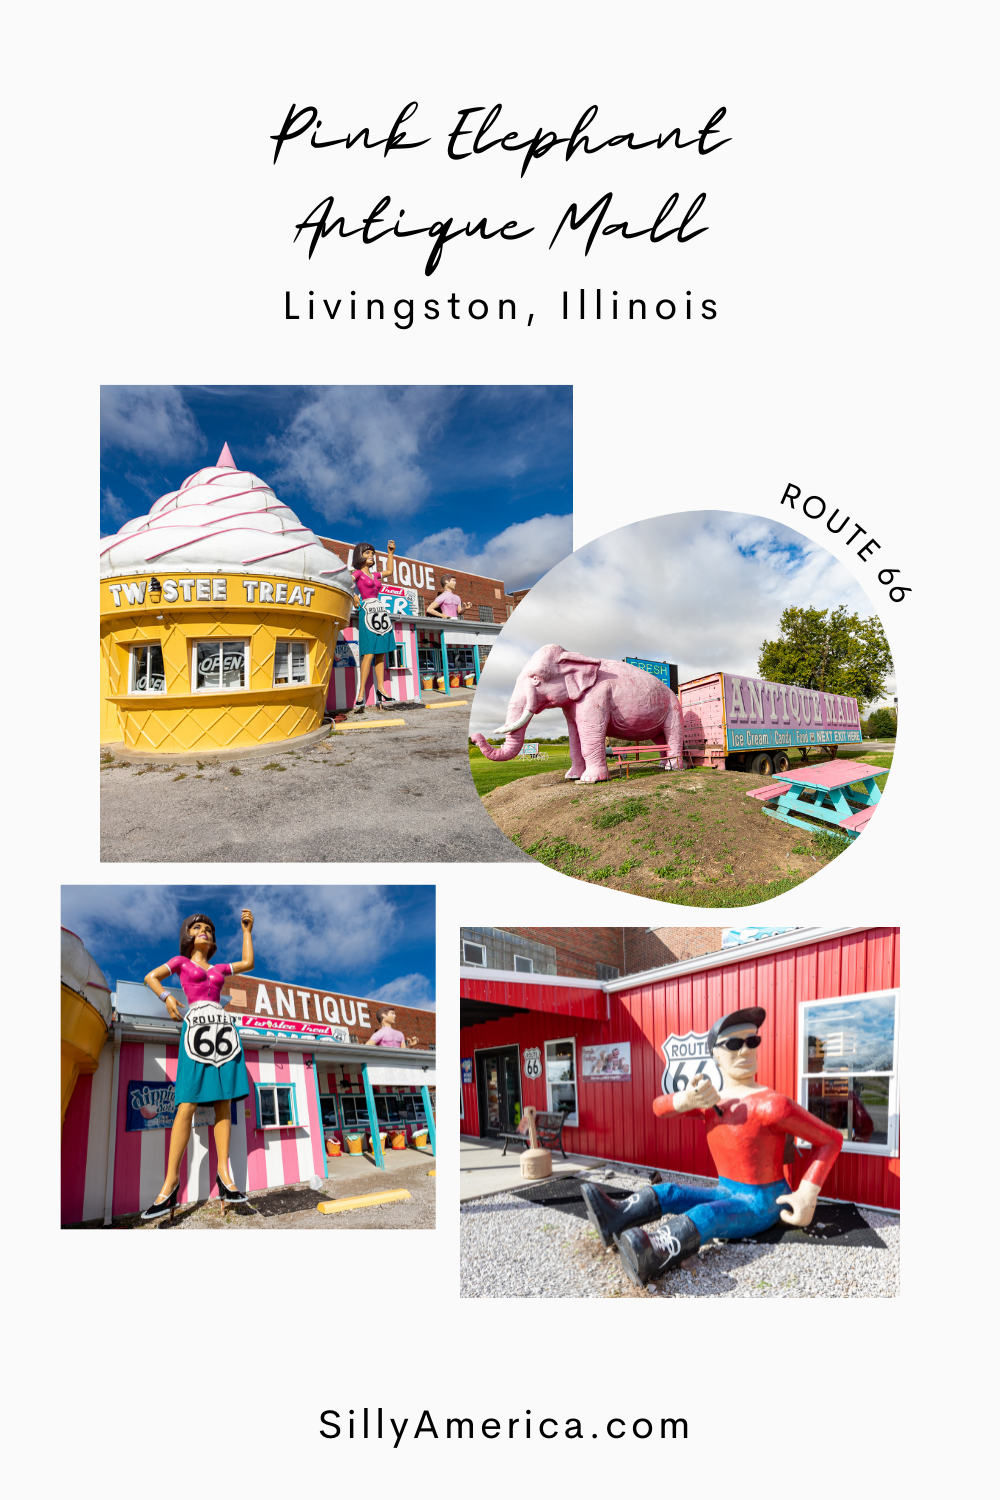 We’ve all heard of pink elephants on parade. But this Route 66 location not only features a giant pink elephant but also a parade of one more giant thing after the next. At the Pink Elephant Antique Mall in Livingston, Illinois you can find their famous big pink elephant and also so much more.  #RoadTrips #RoadTripStop #Route66 #Route66RoadTrip #IllinoisRoute66 #Illinois #IllinoisRoadTrip #IllinoisRoadsideAttractions #RoadsideAttractions #RoadsideAttraction #RoadsideAmerica #RoadTrip